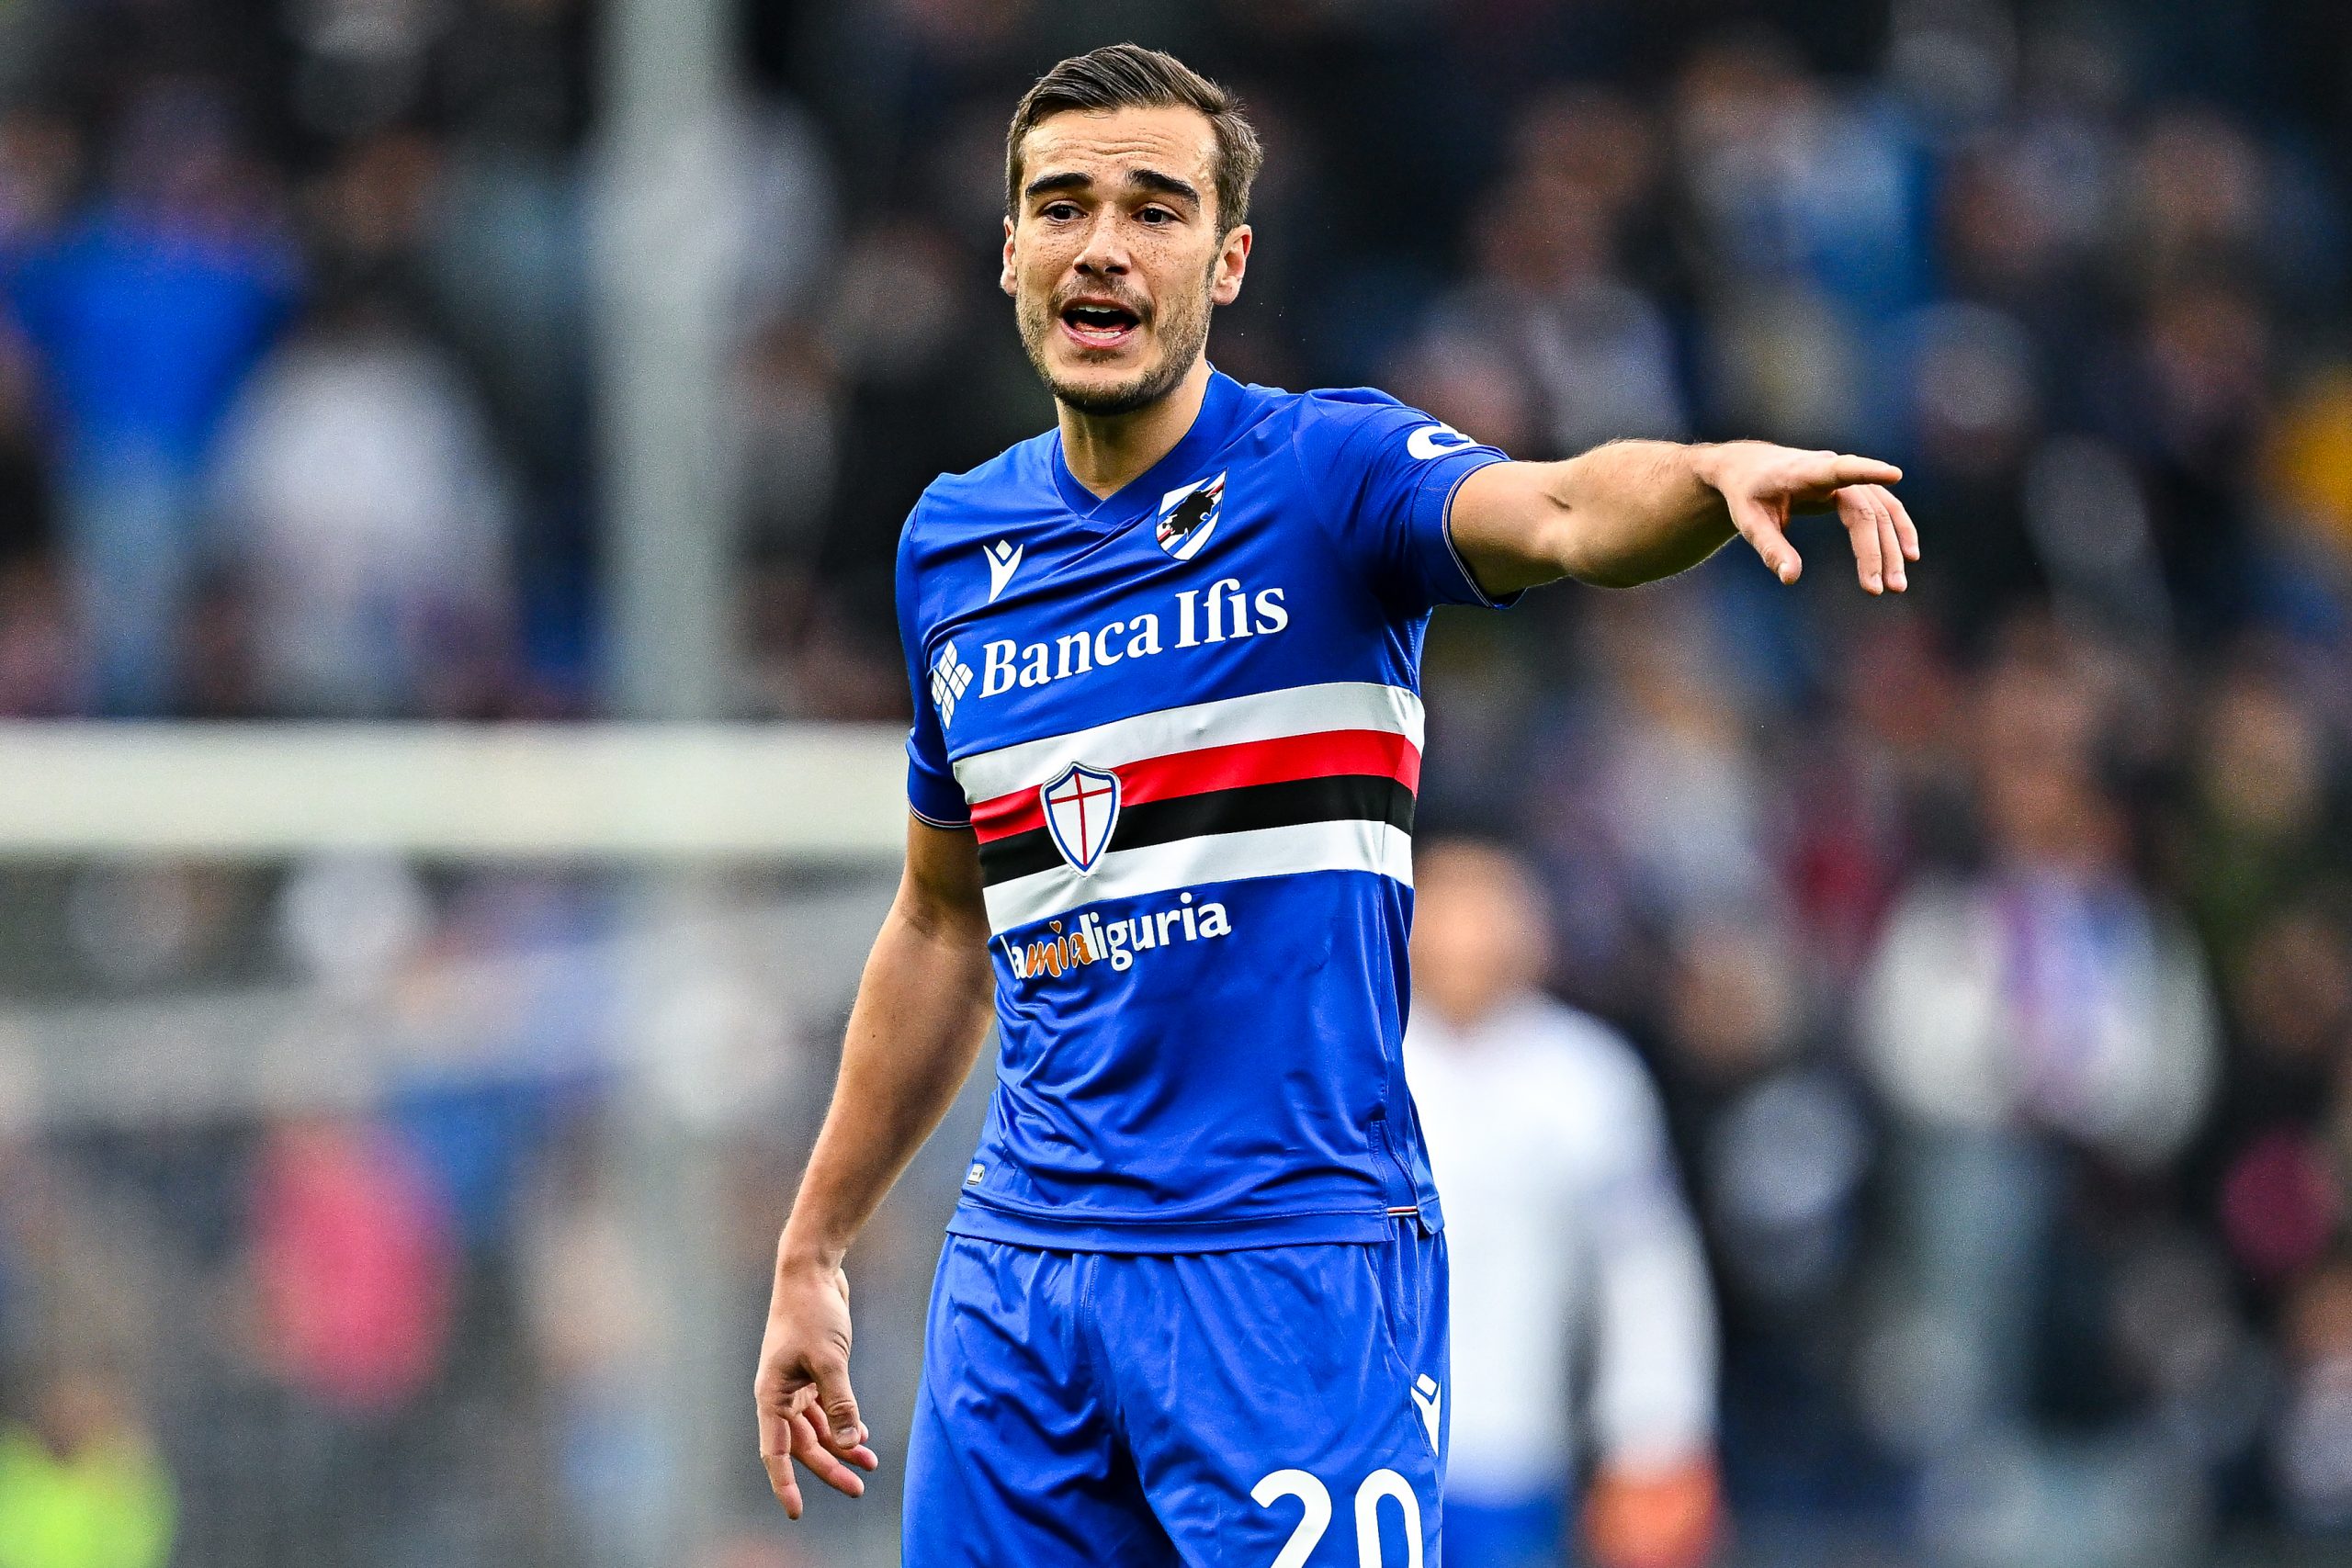 Tottenham loanee Harry Winks in action for Sampdoria. (Photo by Simone Arveda/Getty Images)